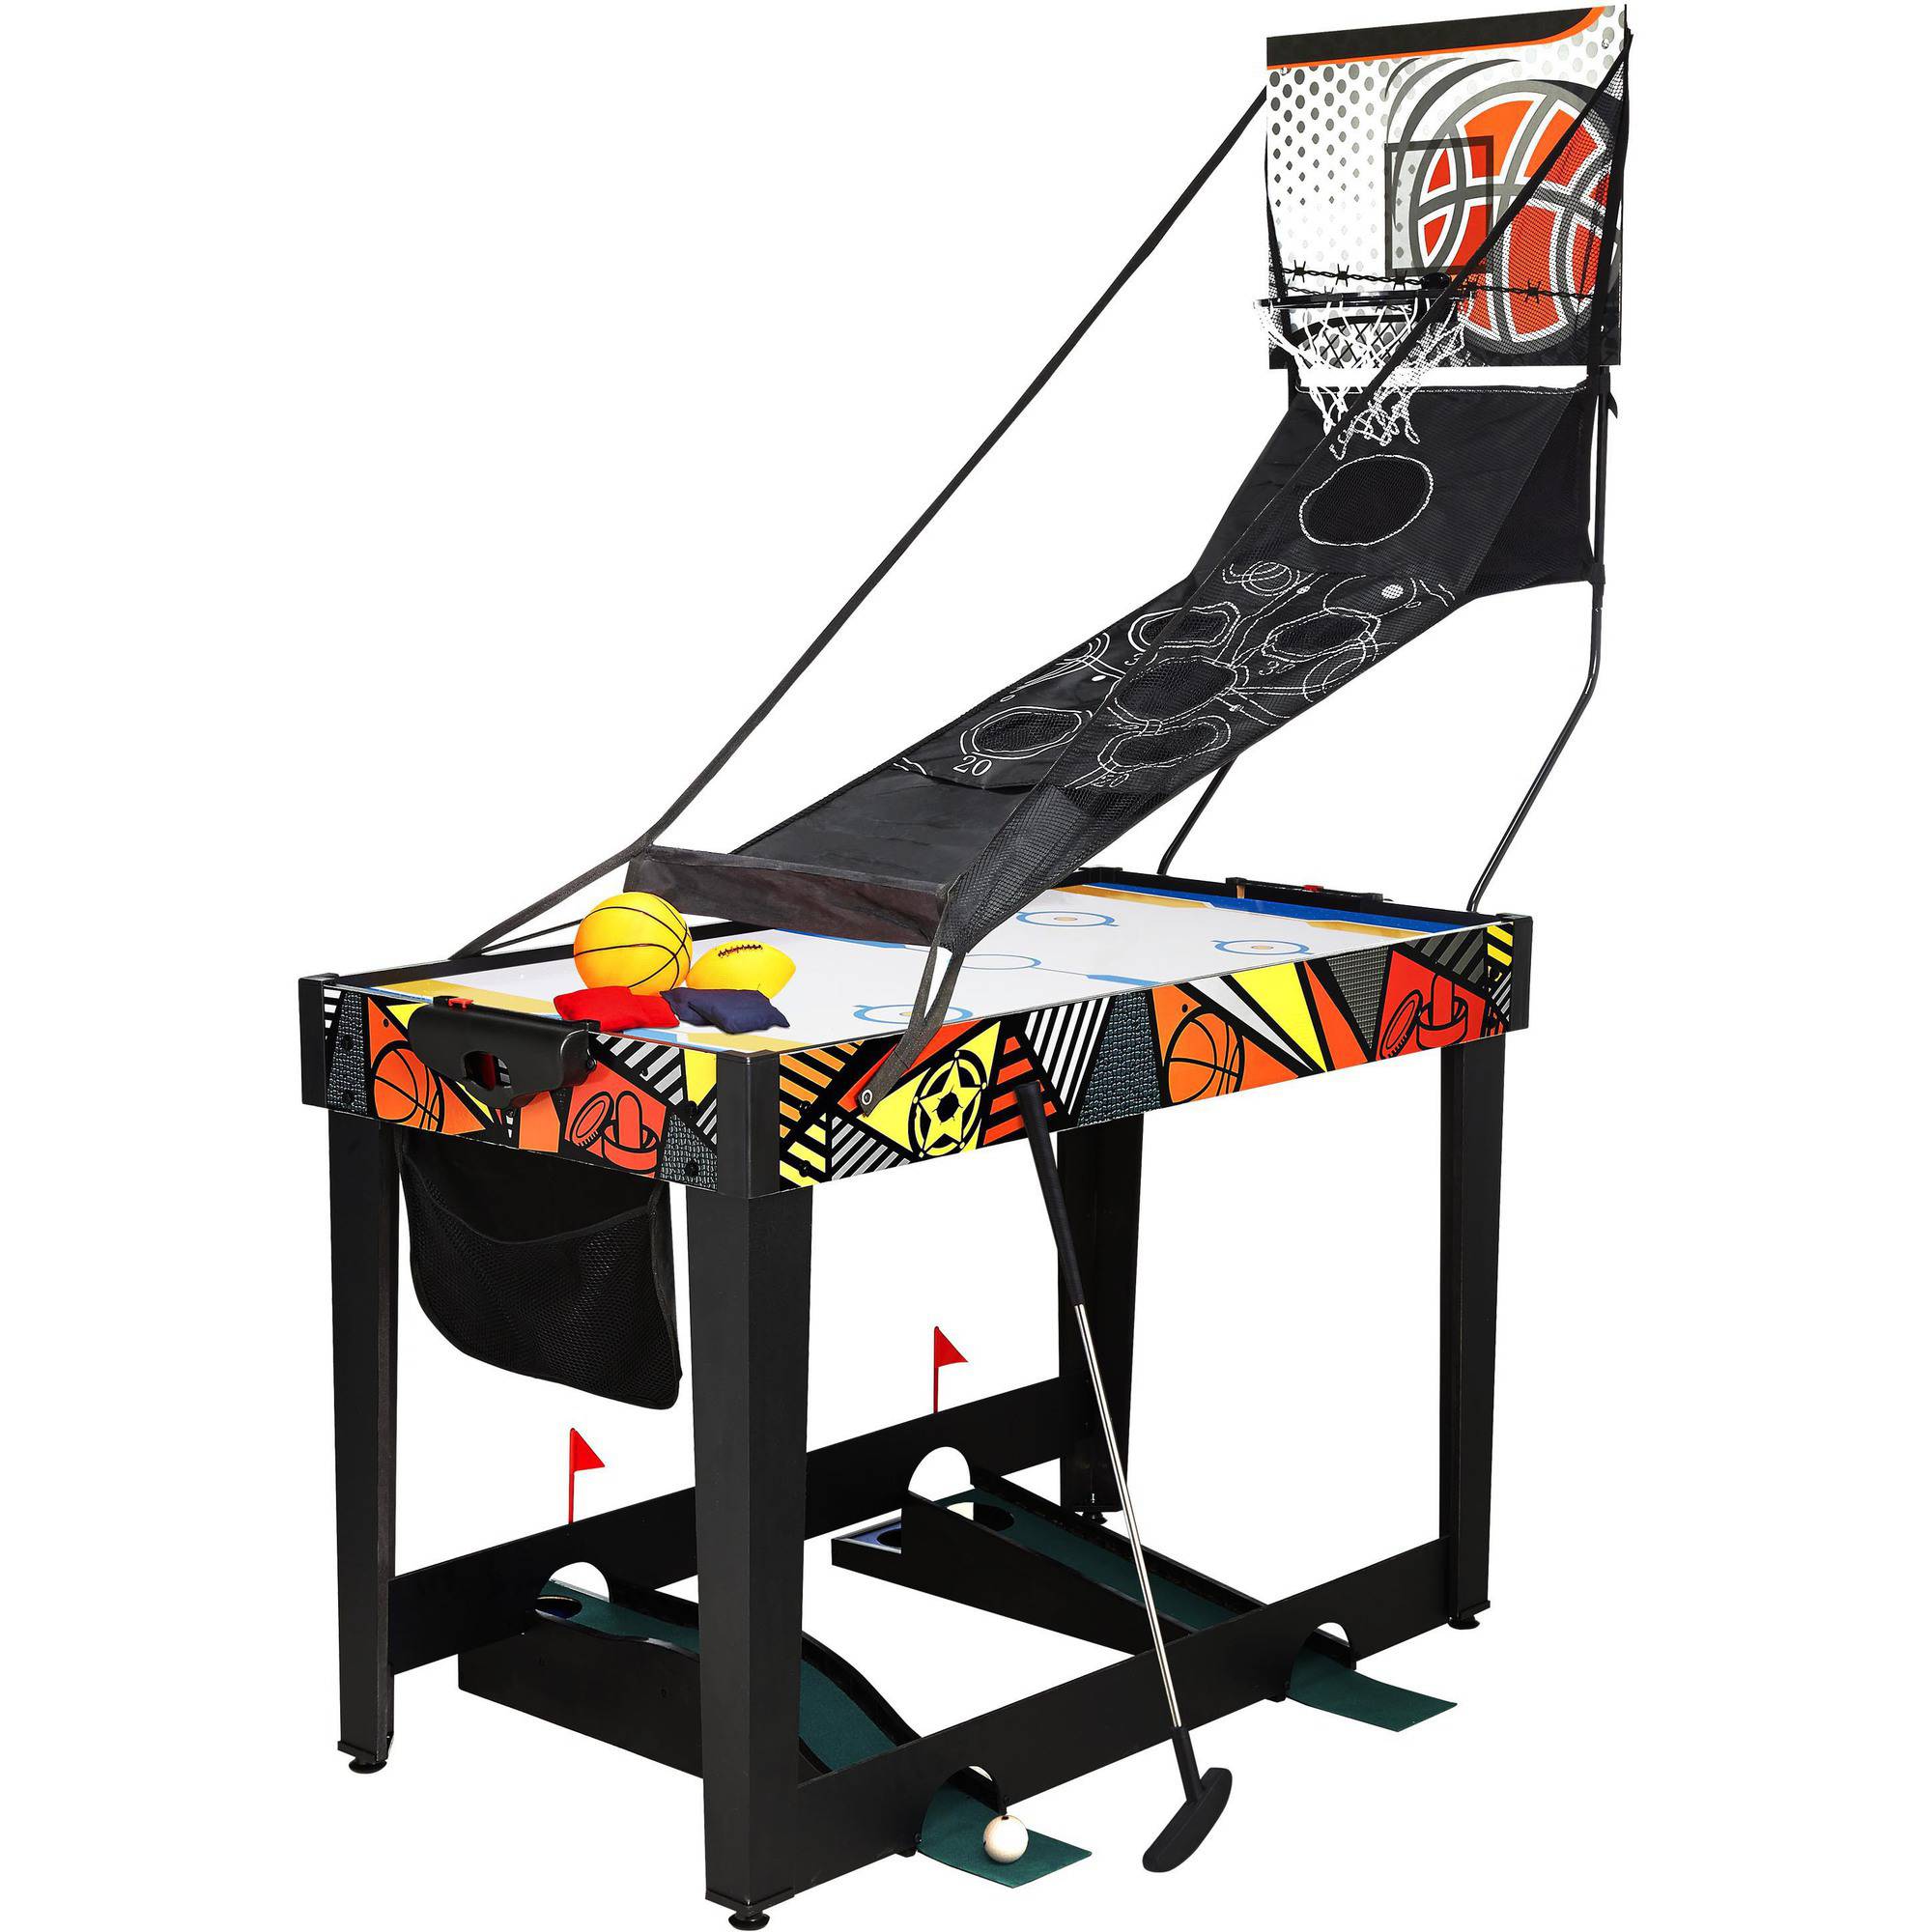 48" 12-in-1 Multi-Activity Combination Game Table - image 3 of 11